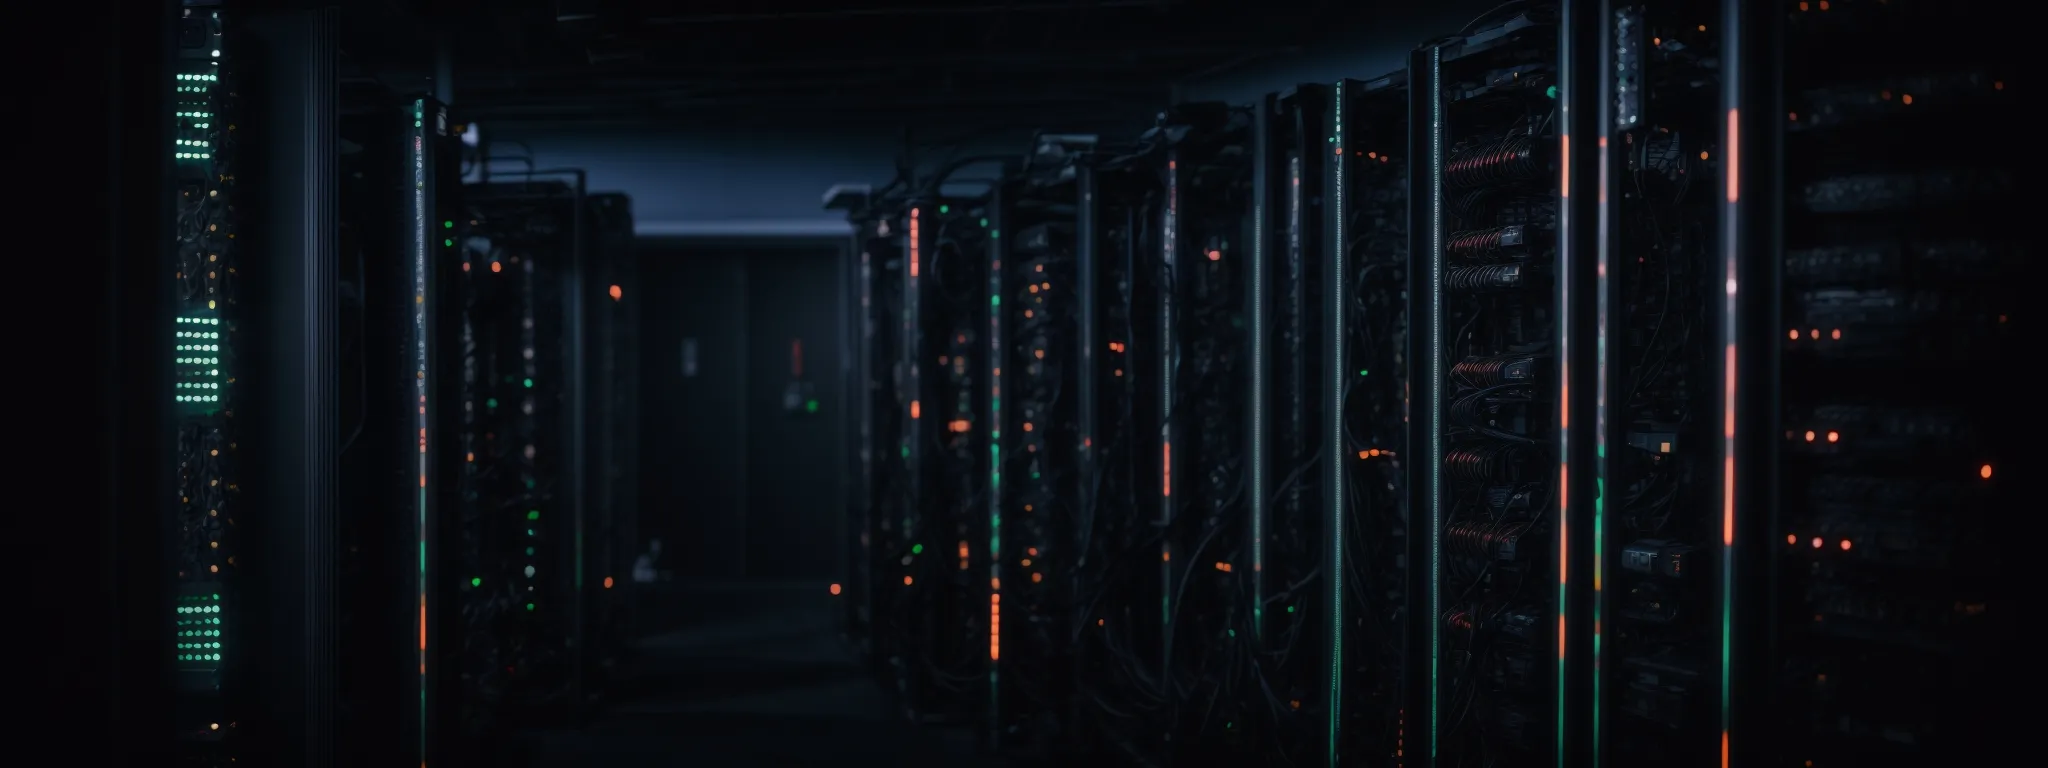 a server rack in a data center with glowing lights indicating active network traffic.